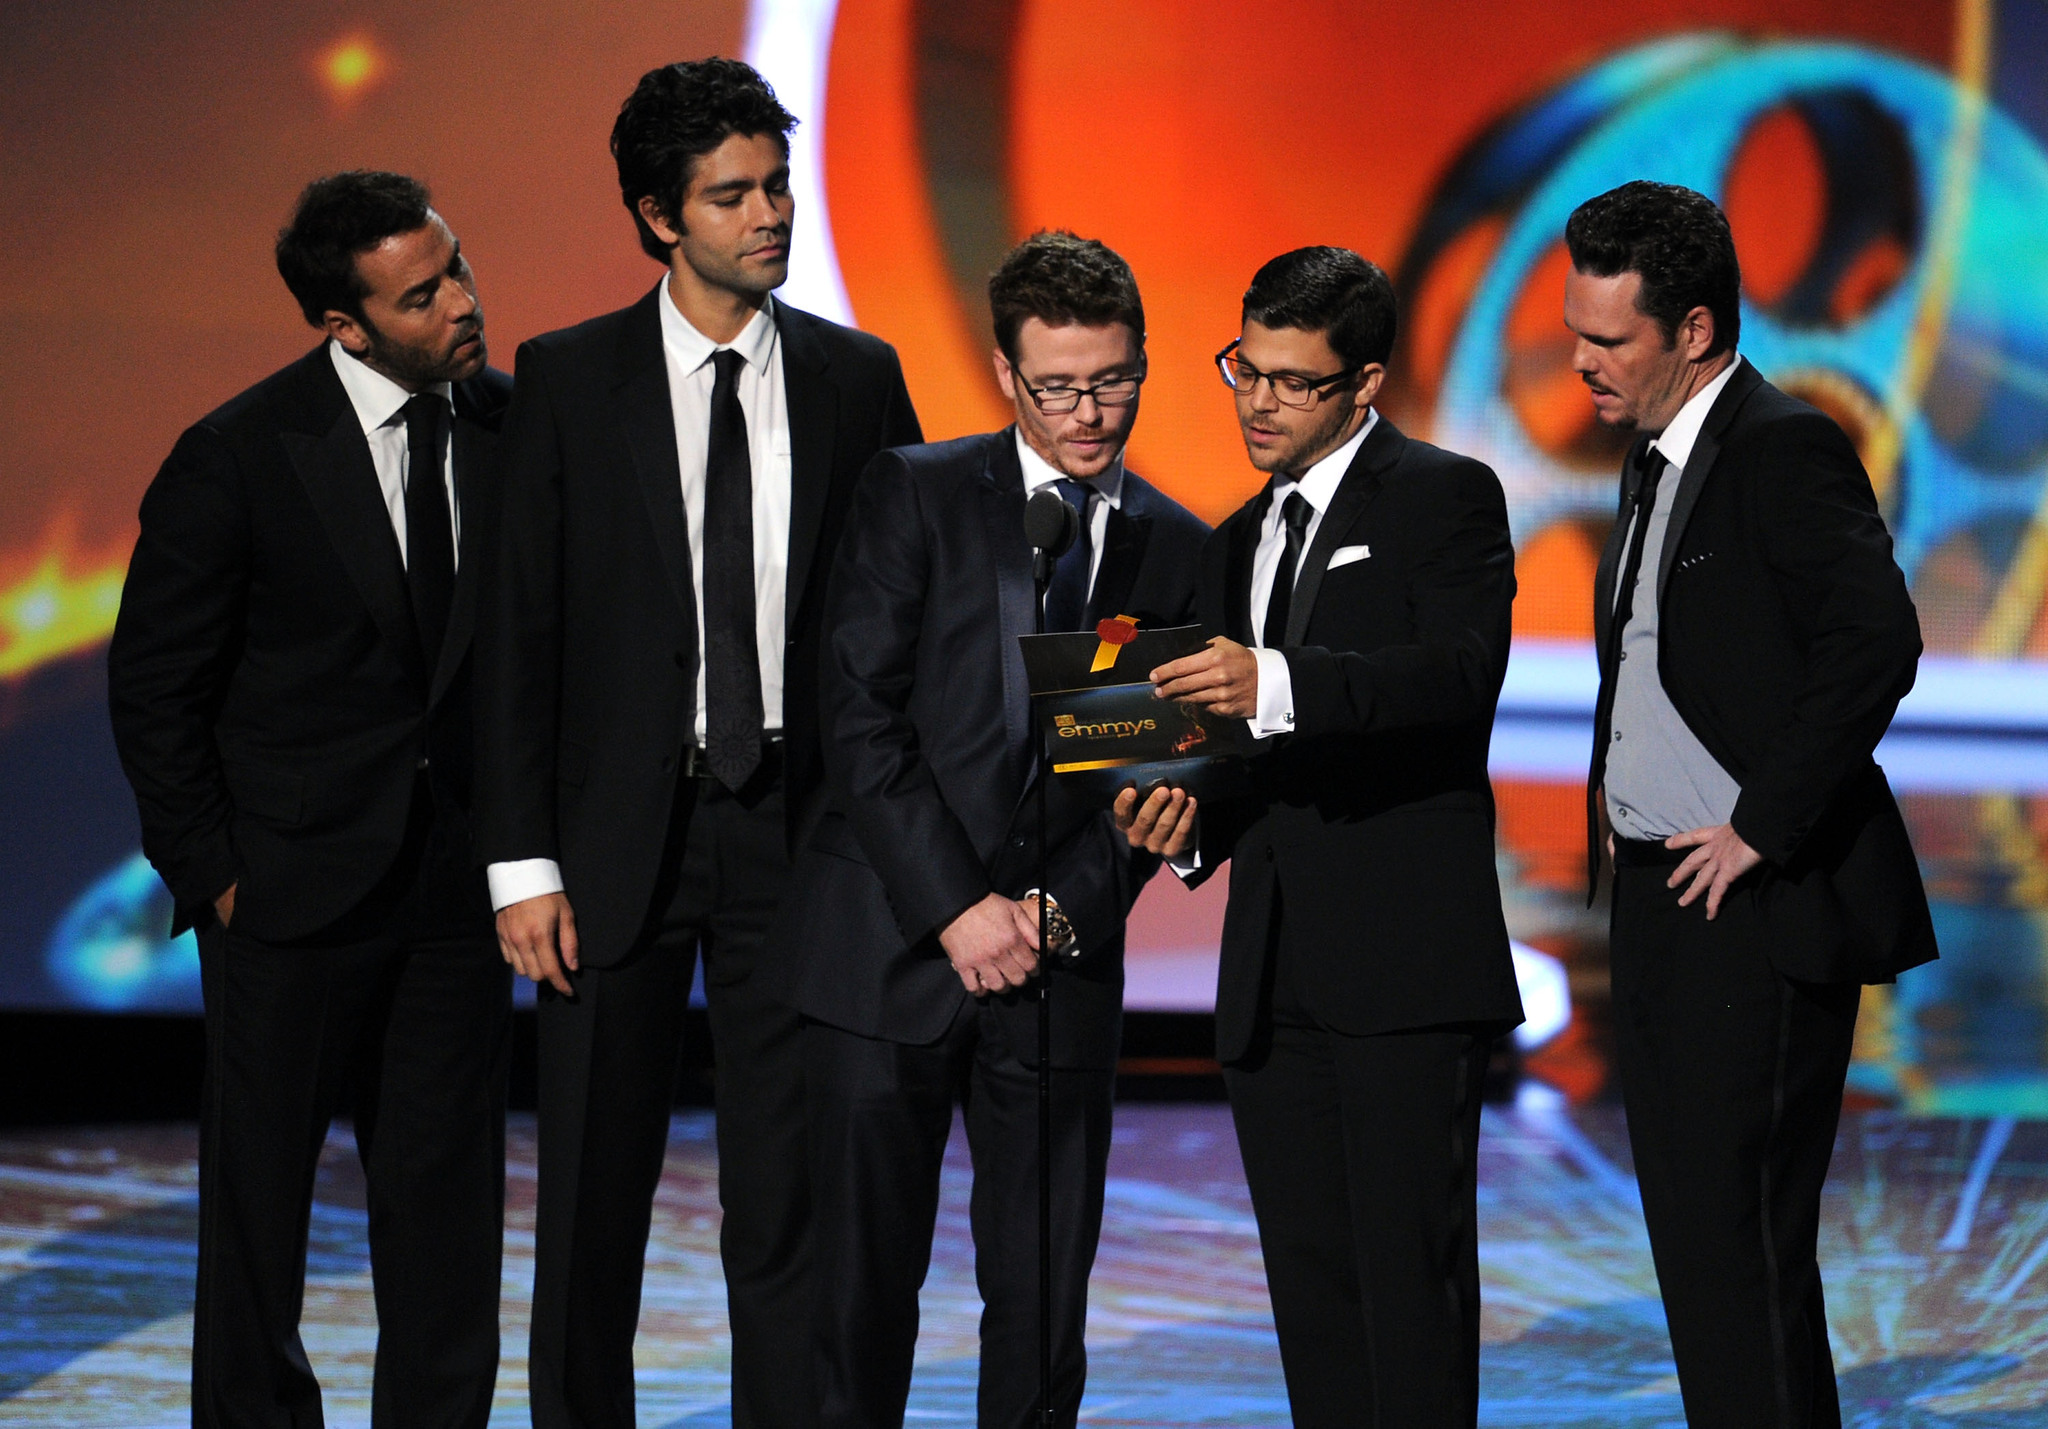 Kevin Dillon, Adrian Grenier, Jeremy Piven, Kevin Connolly and Jerry Ferrara